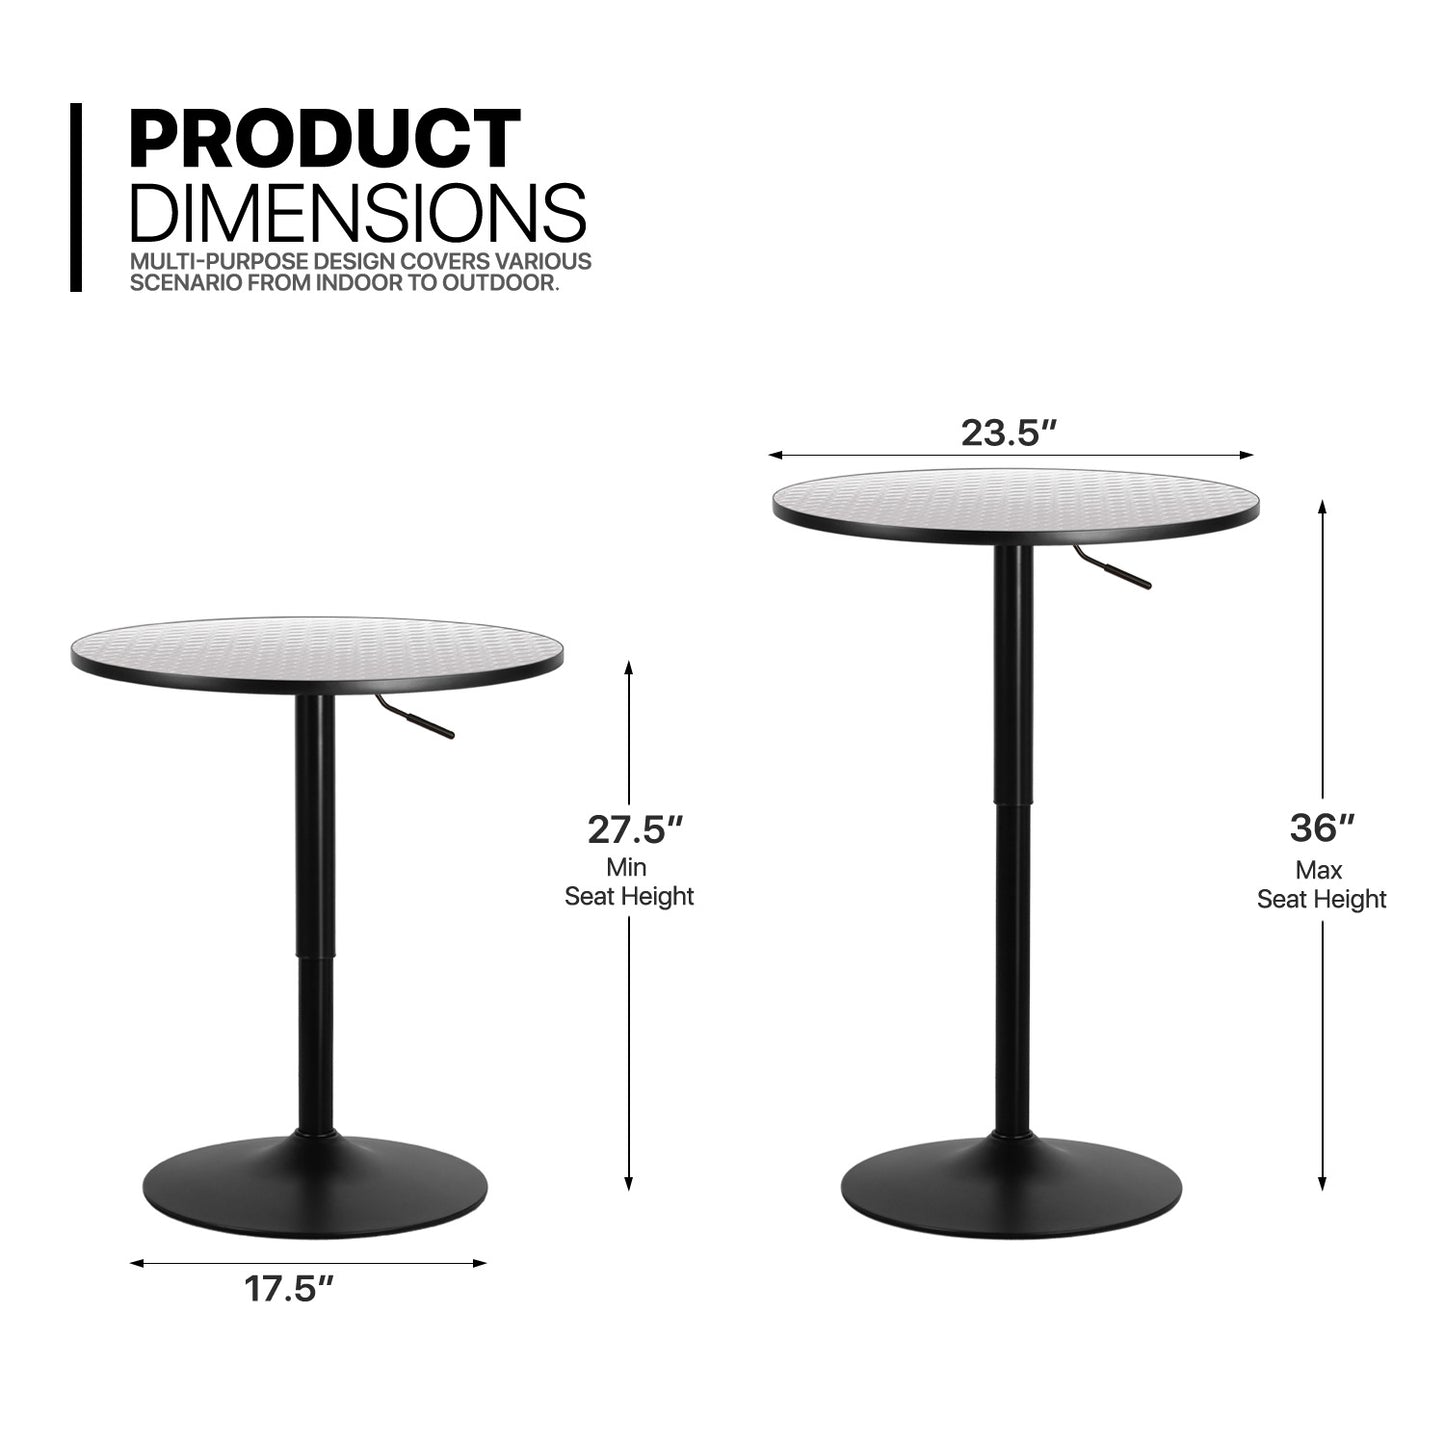 Adjustable Height Bar Table - 27.5" to 35"